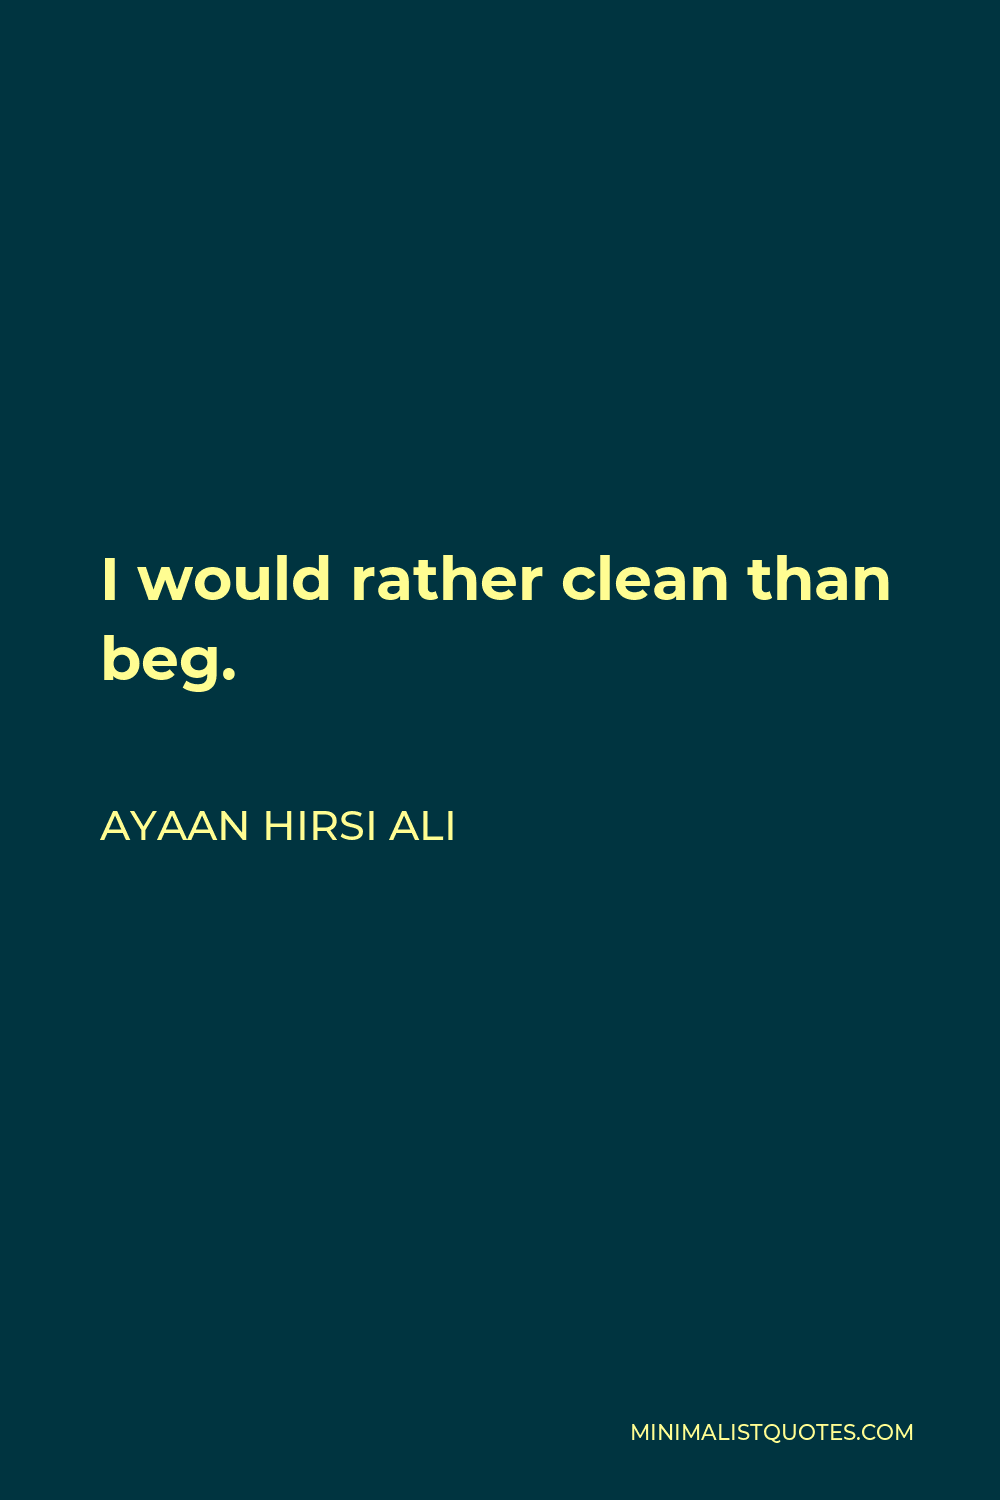 Ayaan Hirsi Ali Quote - I would rather clean than beg.